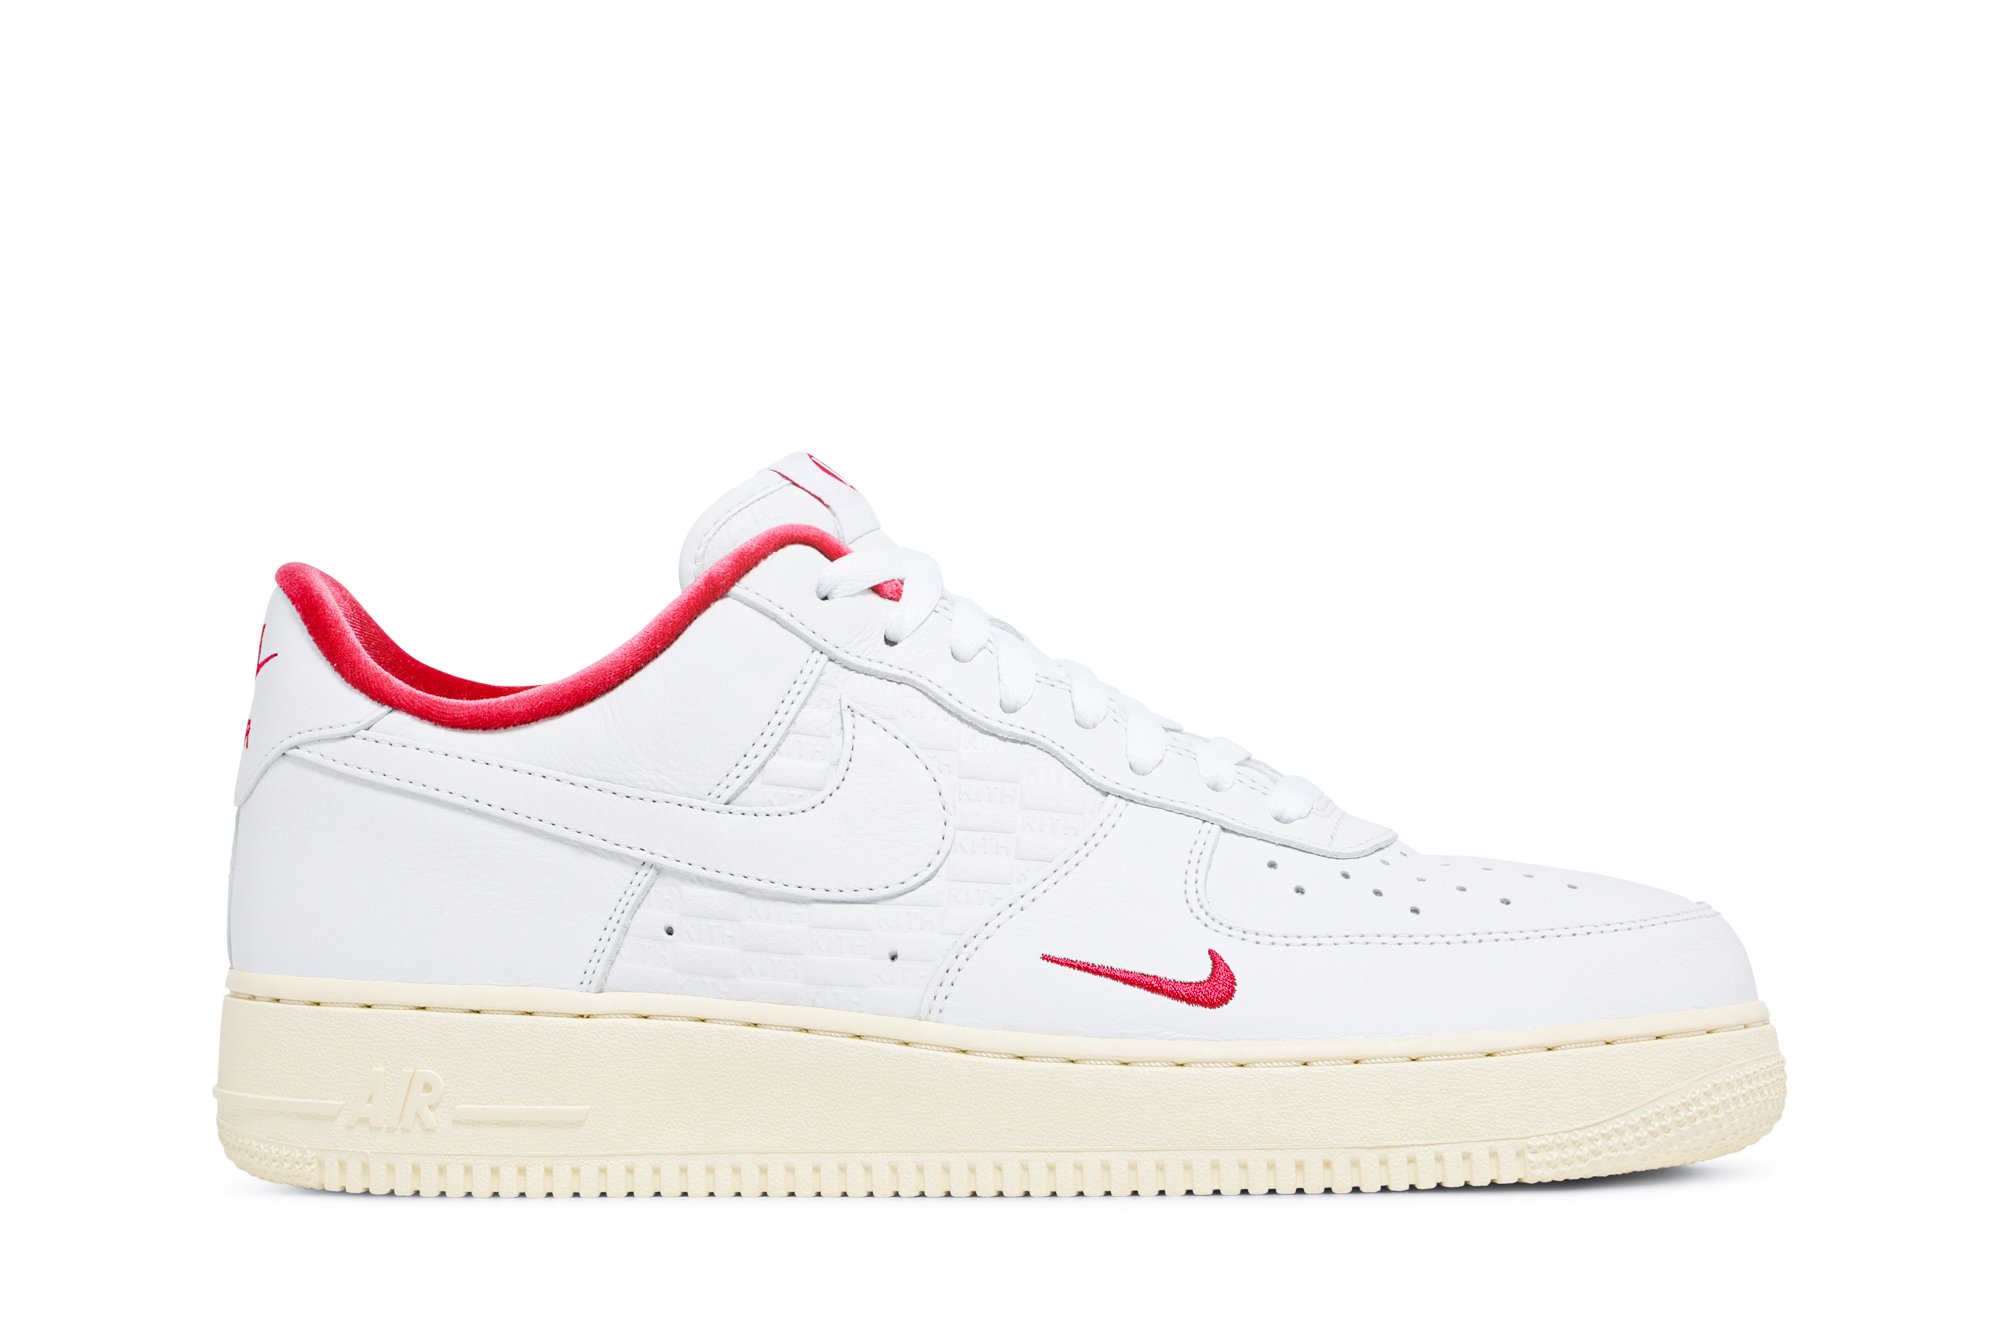 Buy Kith x Air Force 1 Low 'Tokyo' - CZ7926 100 | GOAT